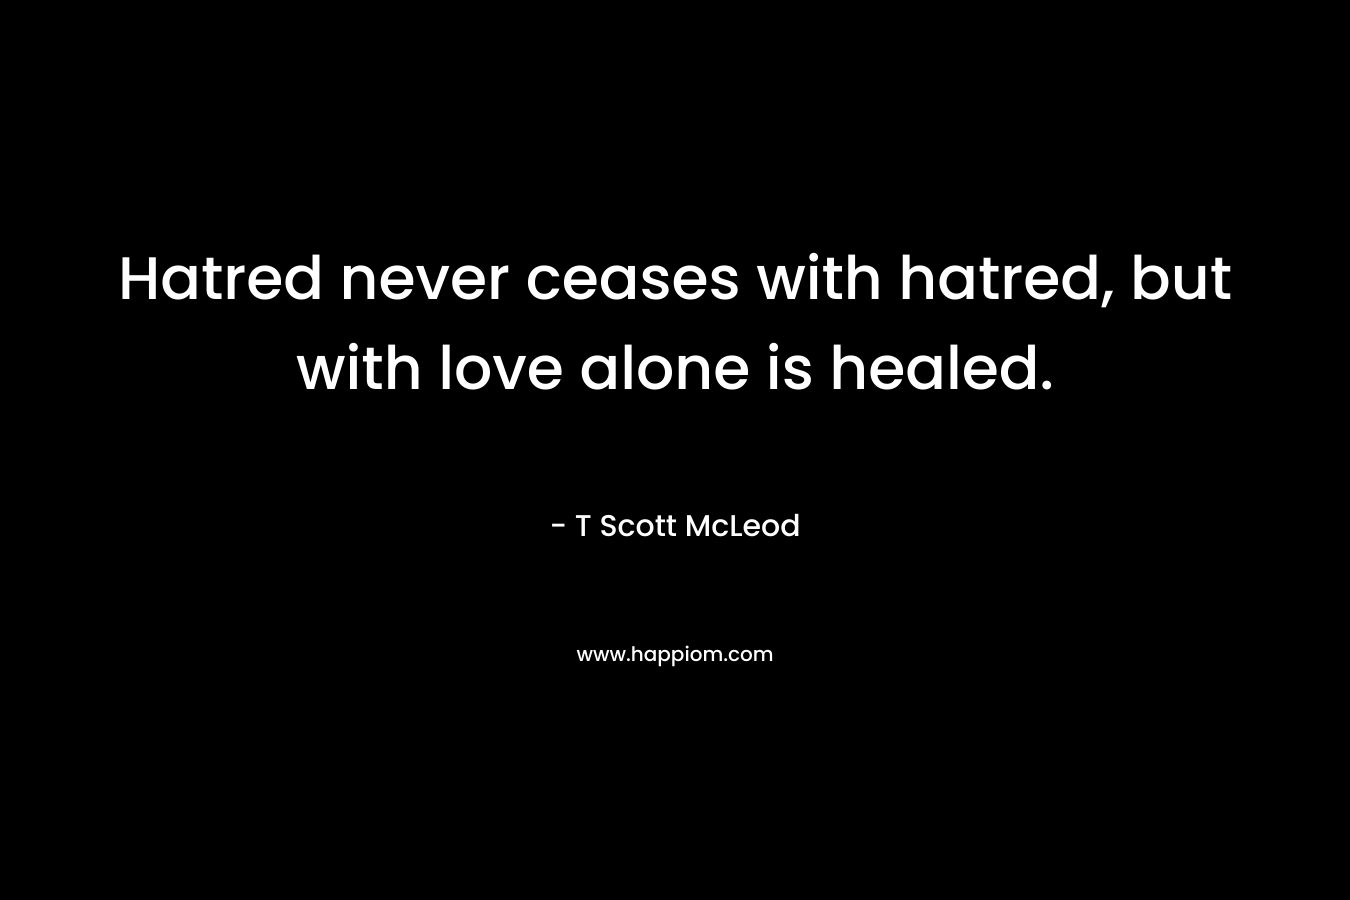 Hatred never ceases with hatred, but with love alone is healed.